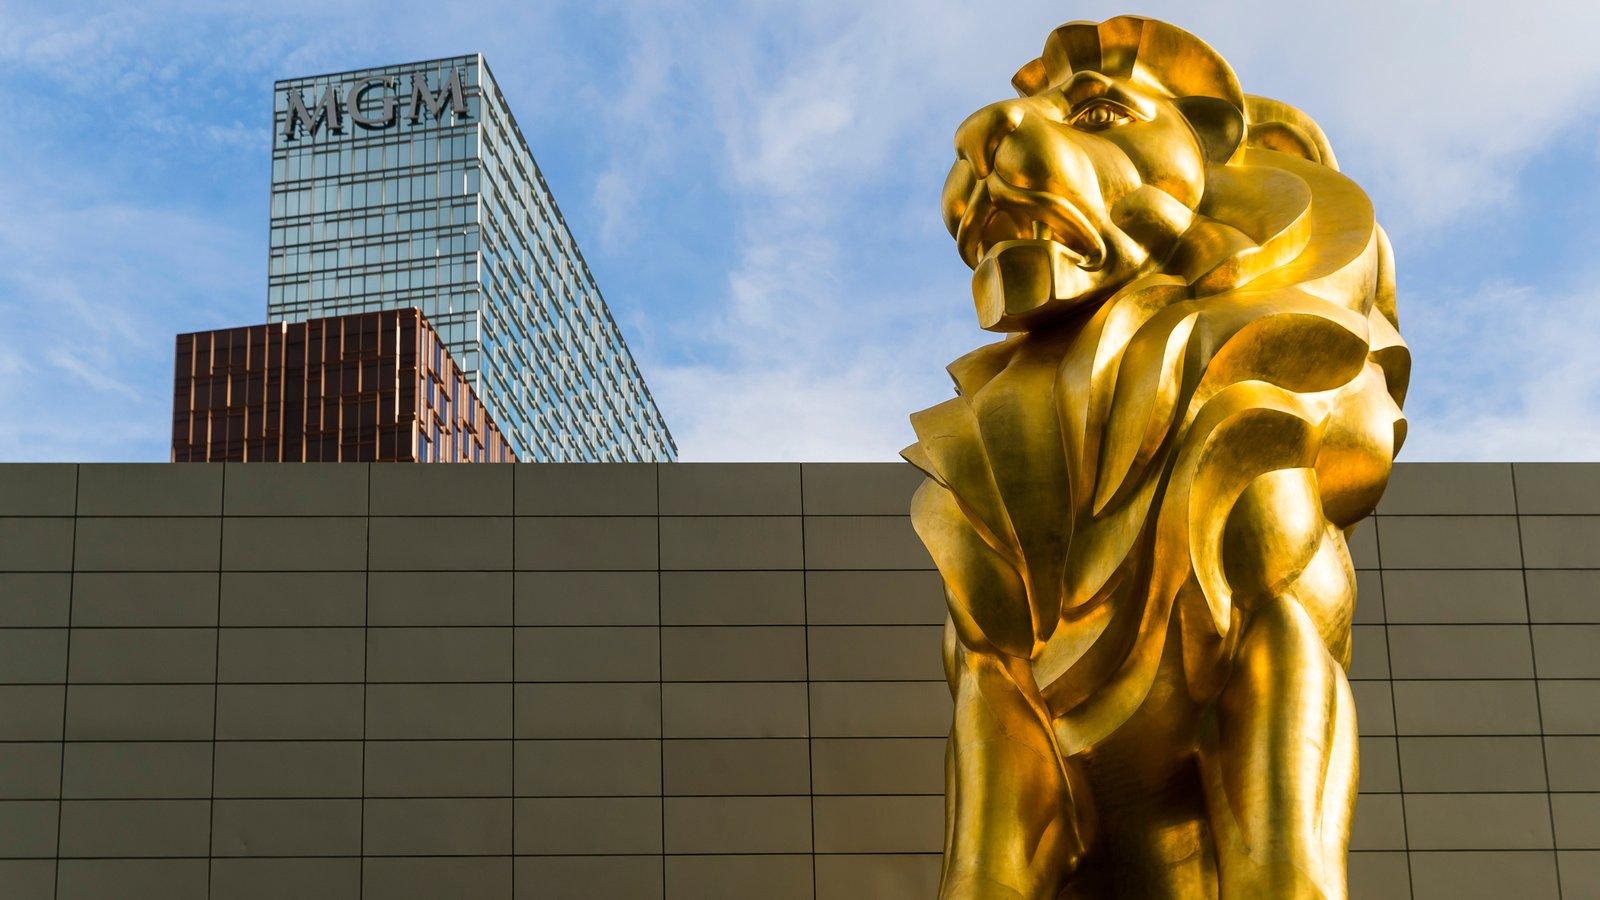 Ladbrokes' owner enters joint venture with MGM Resorts